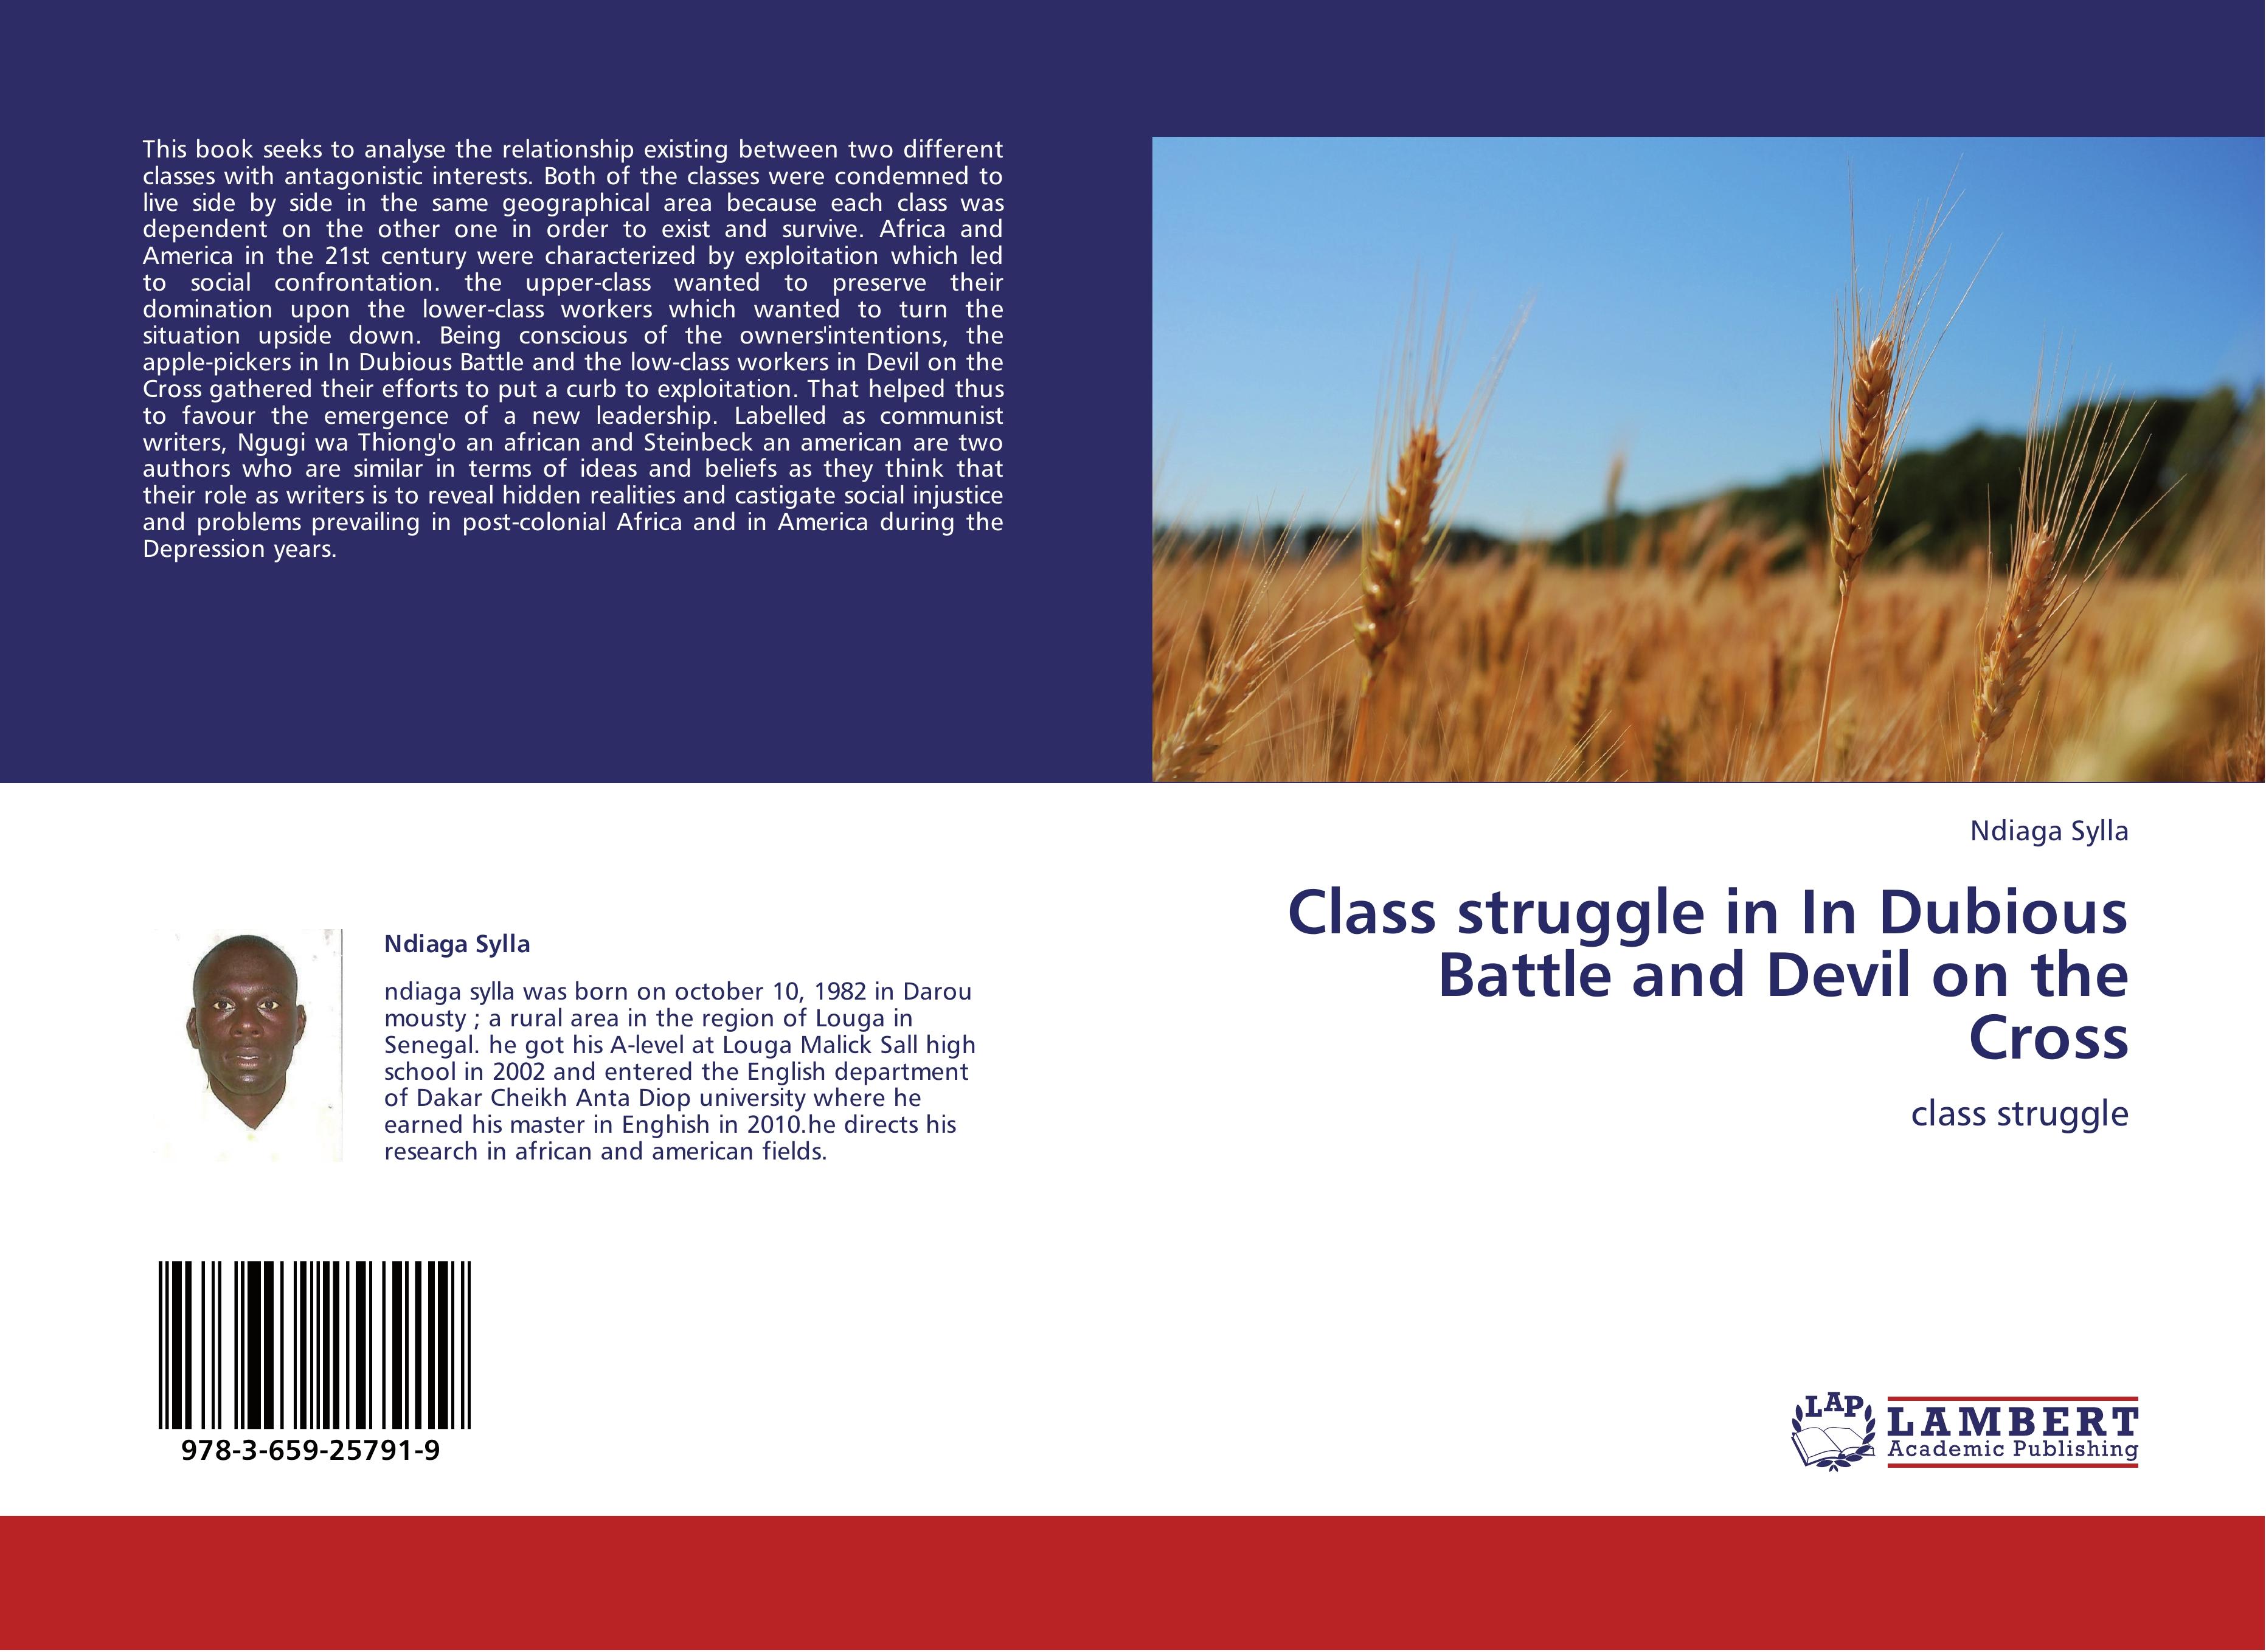 Class struggle in In Dubious Battle and Devil on the Cross - Ndiaga Sylla